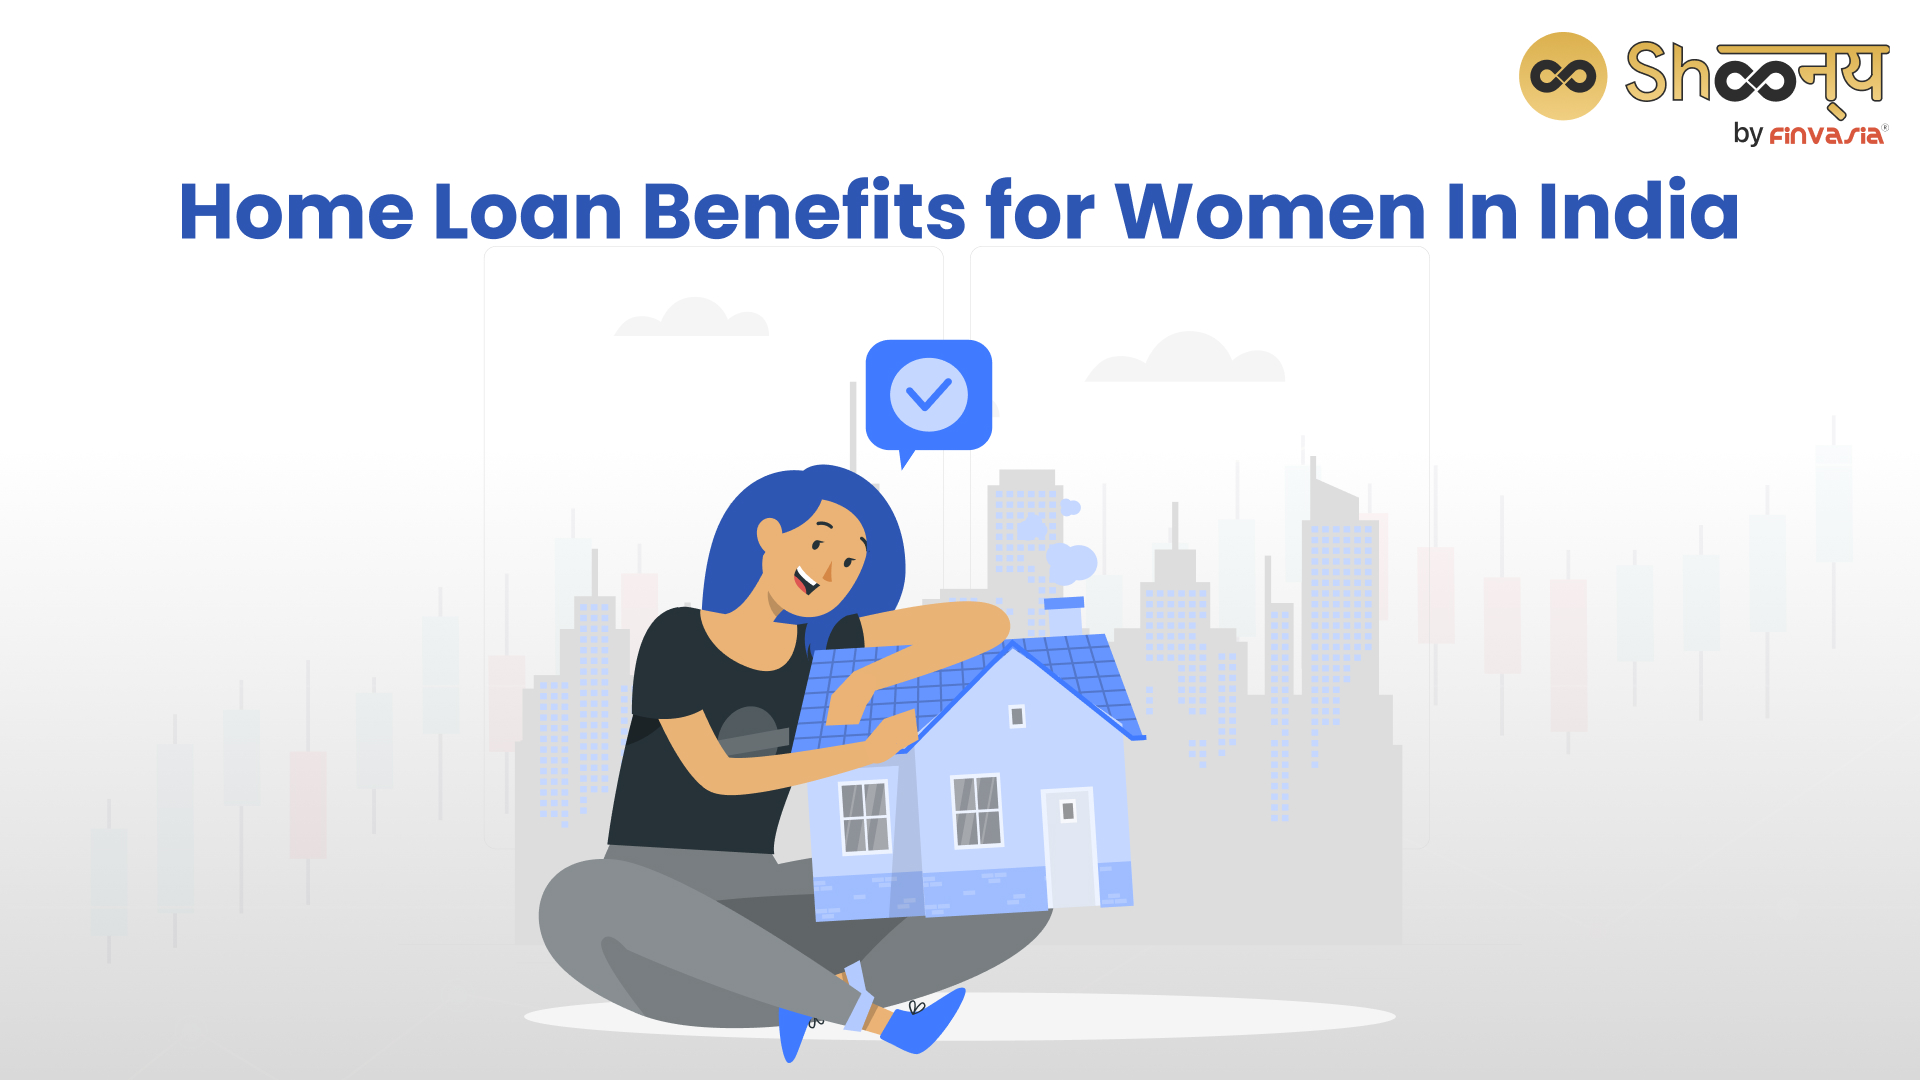 Home Loan for Women: Details and Benefits